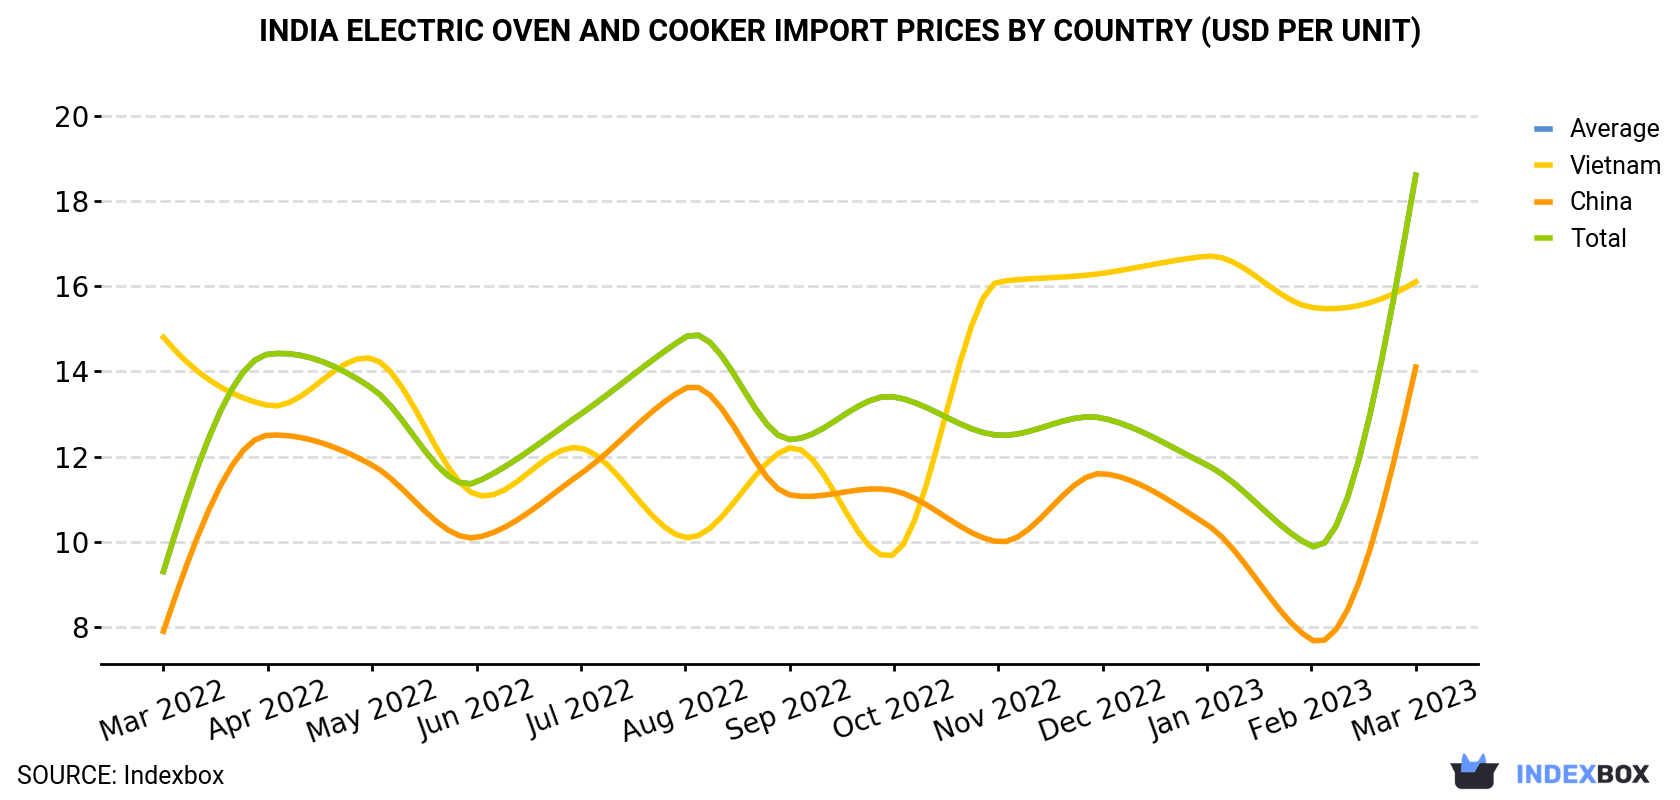 India Electric Oven And Cooker Import Prices By Country (USD Per Unit)